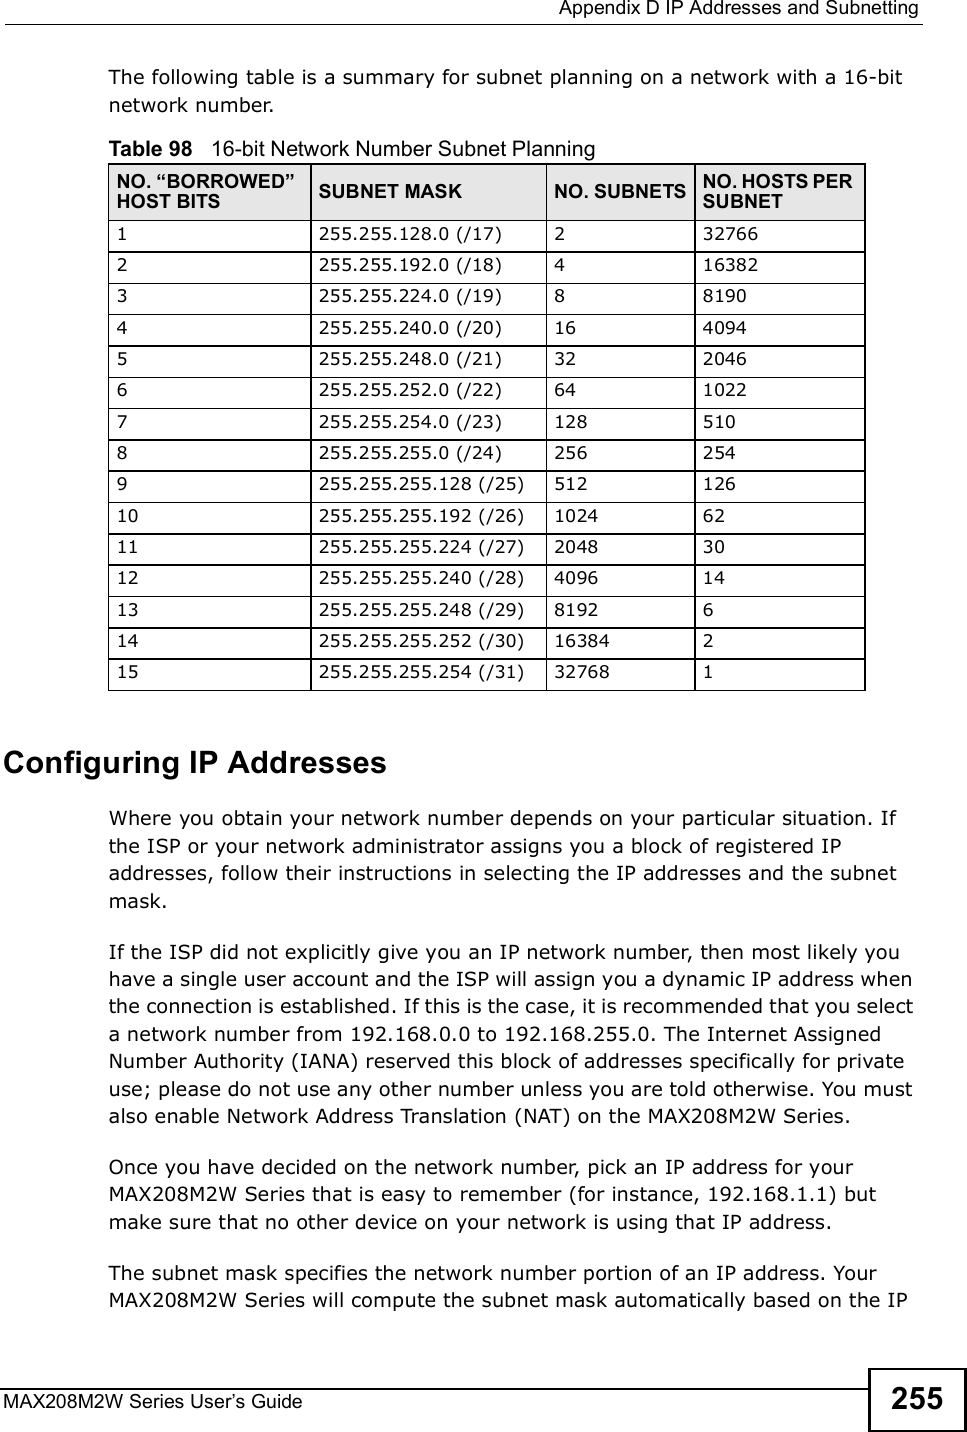  Appendix DIP Addresses and SubnettingMAX208M2W Series User s Guide 255The following table is a summary for subnet planning on a network with a 16-bit network number. Configuring IP AddressesWhere you obtain your network number depends on your particular situation. If the ISP or your network administrator assigns you a block of registered IP addresses, follow their instructions in selecting the IP addresses and the subnet mask.If the ISP did not explicitly give you an IP network number, then most likely you have a single user account and the ISP will assign you a dynamic IP address when the connection is established. If this is the case, it is recommended that you select a network number from 192.168.0.0 to 192.168.255.0. The Internet Assigned Number Authority (IANA) reserved this block of addresses specifically for private use; please do not use any other number unless you are told otherwise. You must also enable Network Address Translation (NAT) on the MAX208M2W Series. Once you have decided on the network number, pick an IP address for your MAX208M2W Series that is easy to remember (for instance, 192.168.1.1) but make sure that no other device on your network is using that IP address.The subnet mask specifies the network number portion of an IP address. Your MAX208M2W Series will compute the subnet mask automatically based on the IP Table 98   16-bit Network Number Subnet PlanningNO. #BORROWED$ HOST BITS SUBNET MASK NO. SUBNETS NO. HOSTS PER SUBNET1255.255.128.0 (/17) 2 327662255.255.192.0 (/18) 4 163823255.255.224.0 (/19) 8 81904 255.255.240.0 (/20) 16 40945 255.255.248.0 (/21) 32 20466 255.255.252.0 (/22) 64 10227 255.255.254.0 (/23) 128 5108 255.255.255.0 (/24) 256 2549 255.255.255.128 (/25) 512 12610 255.255.255.192 (/26) 1024 6211 255.255.255.224 (/27) 2048 3012 255.255.255.240 (/28) 4096 1413 255.255.255.248 (/29) 8192 614 255.255.255.252 (/30) 16384 215 255.255.255.254 (/31) 32768 1